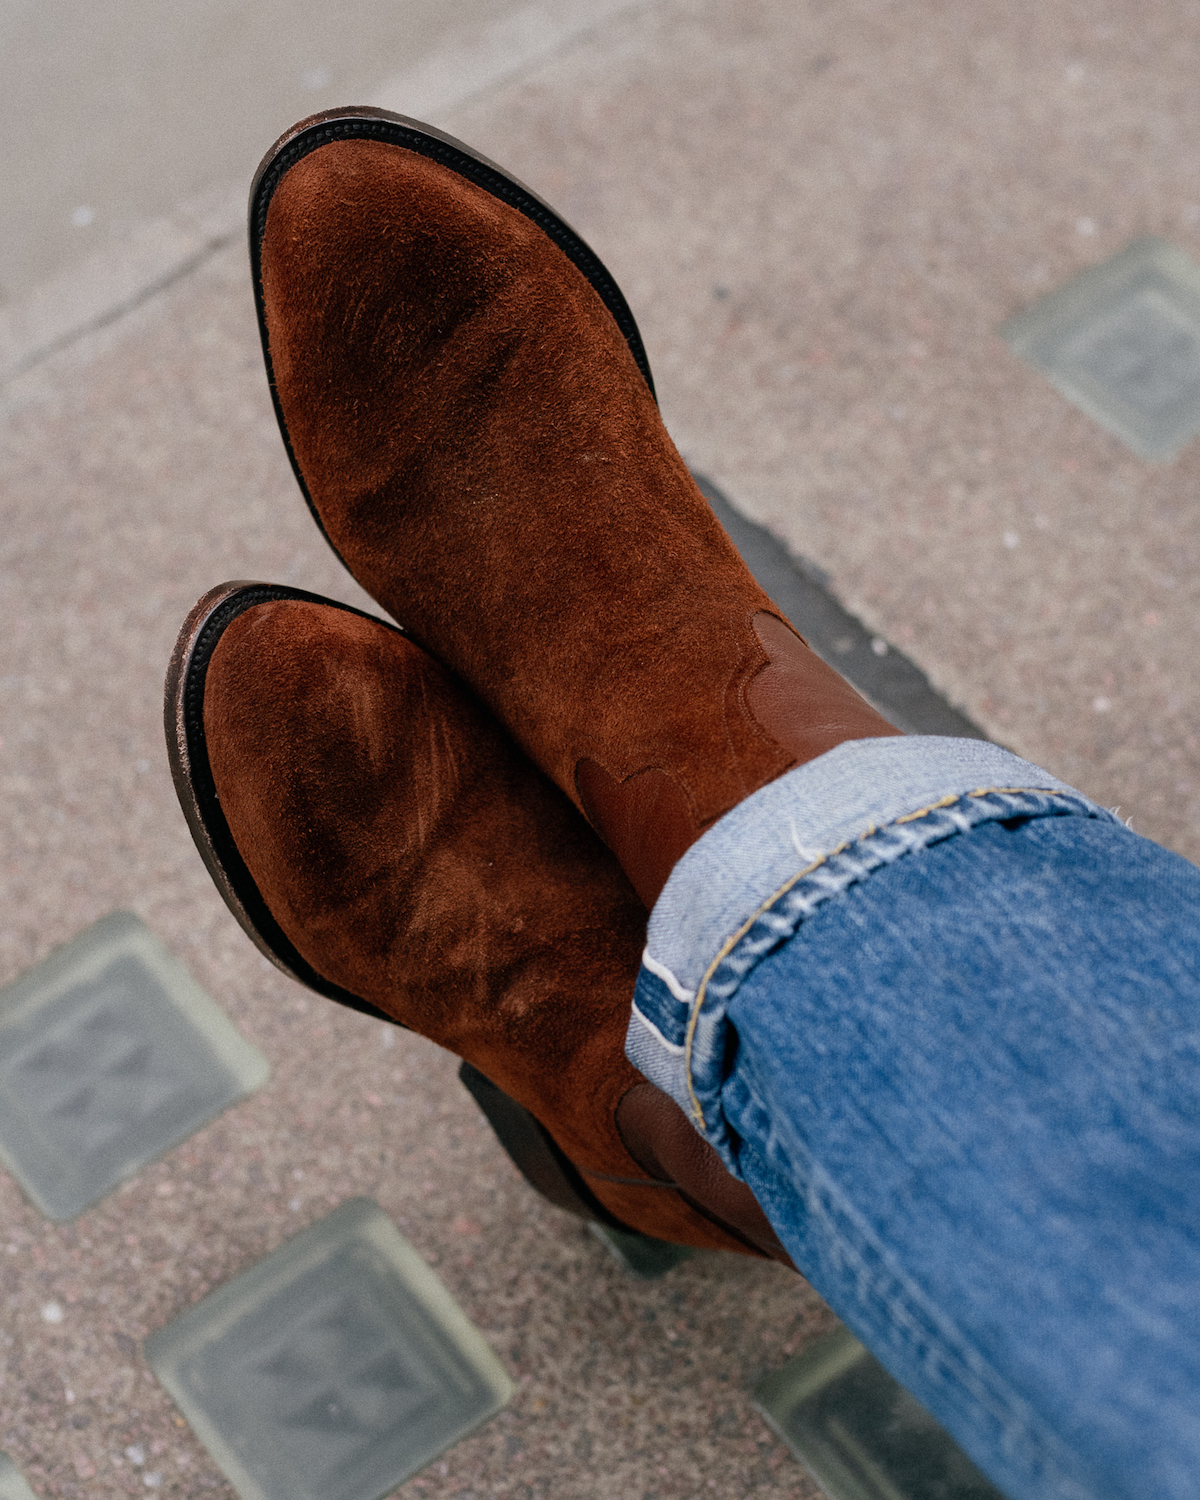 What the best slim fit jeans for roper boots? I would like them to